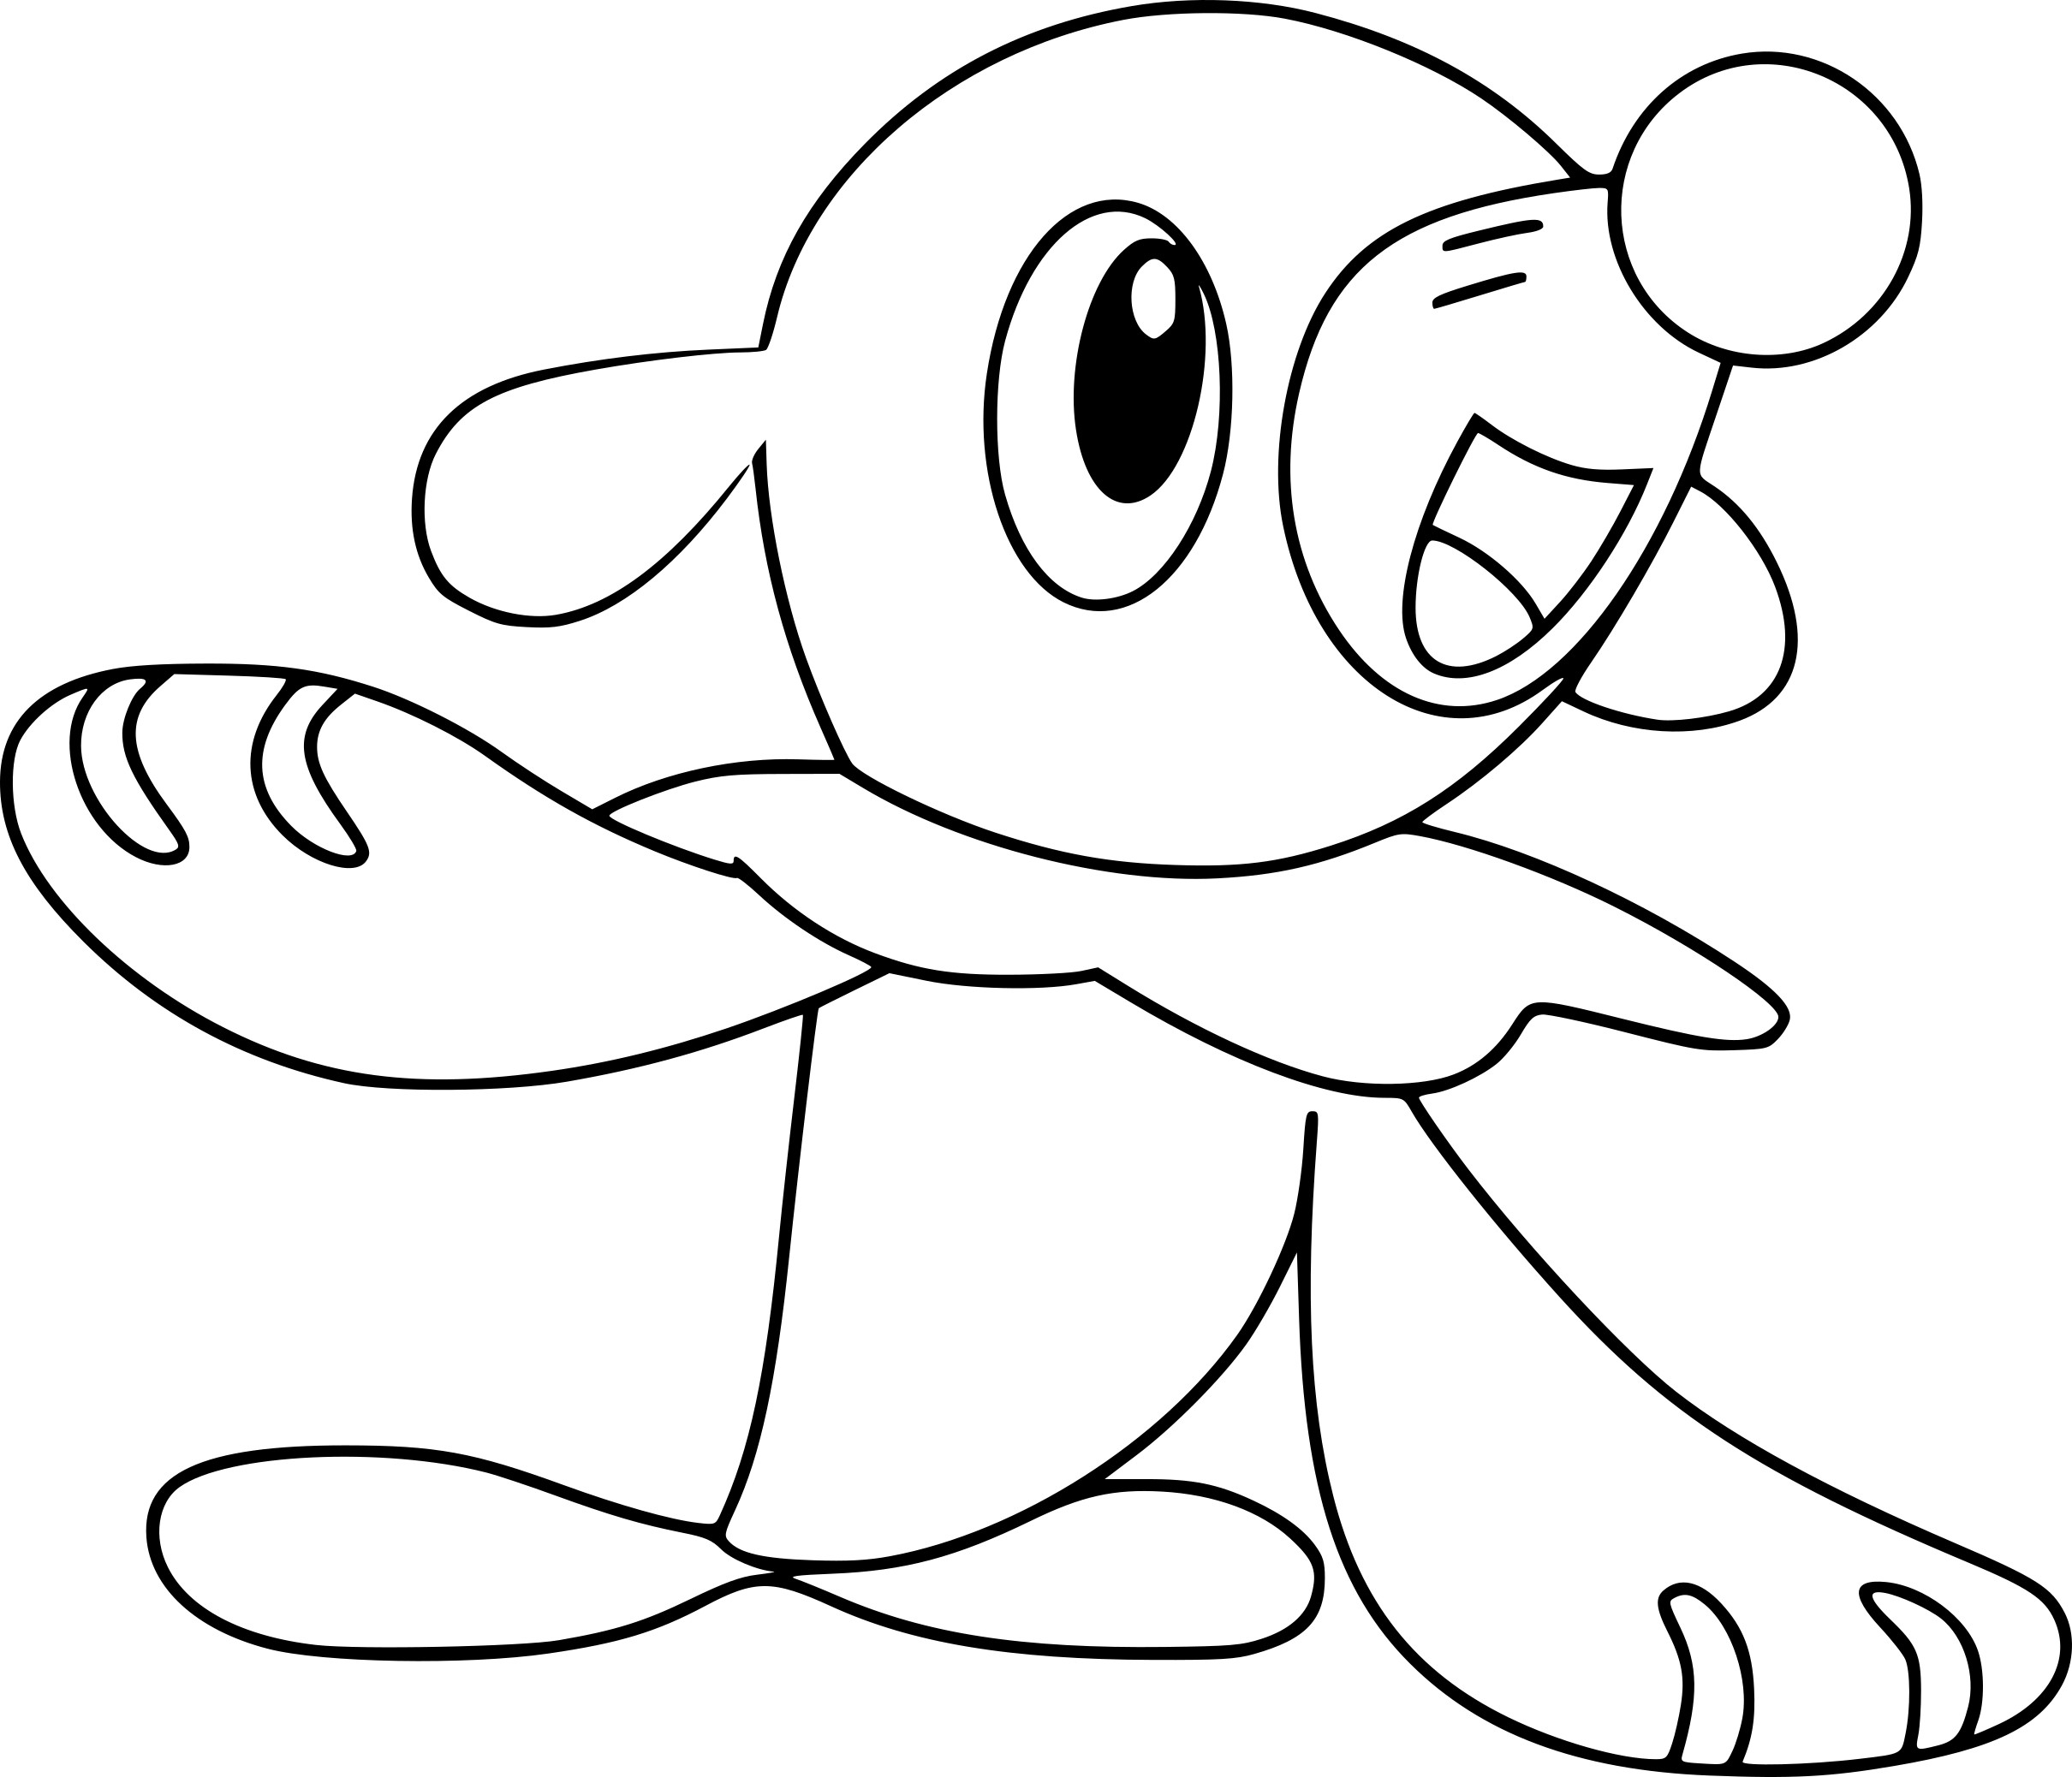 Popplio Pokemon Sun And Moon coloring page